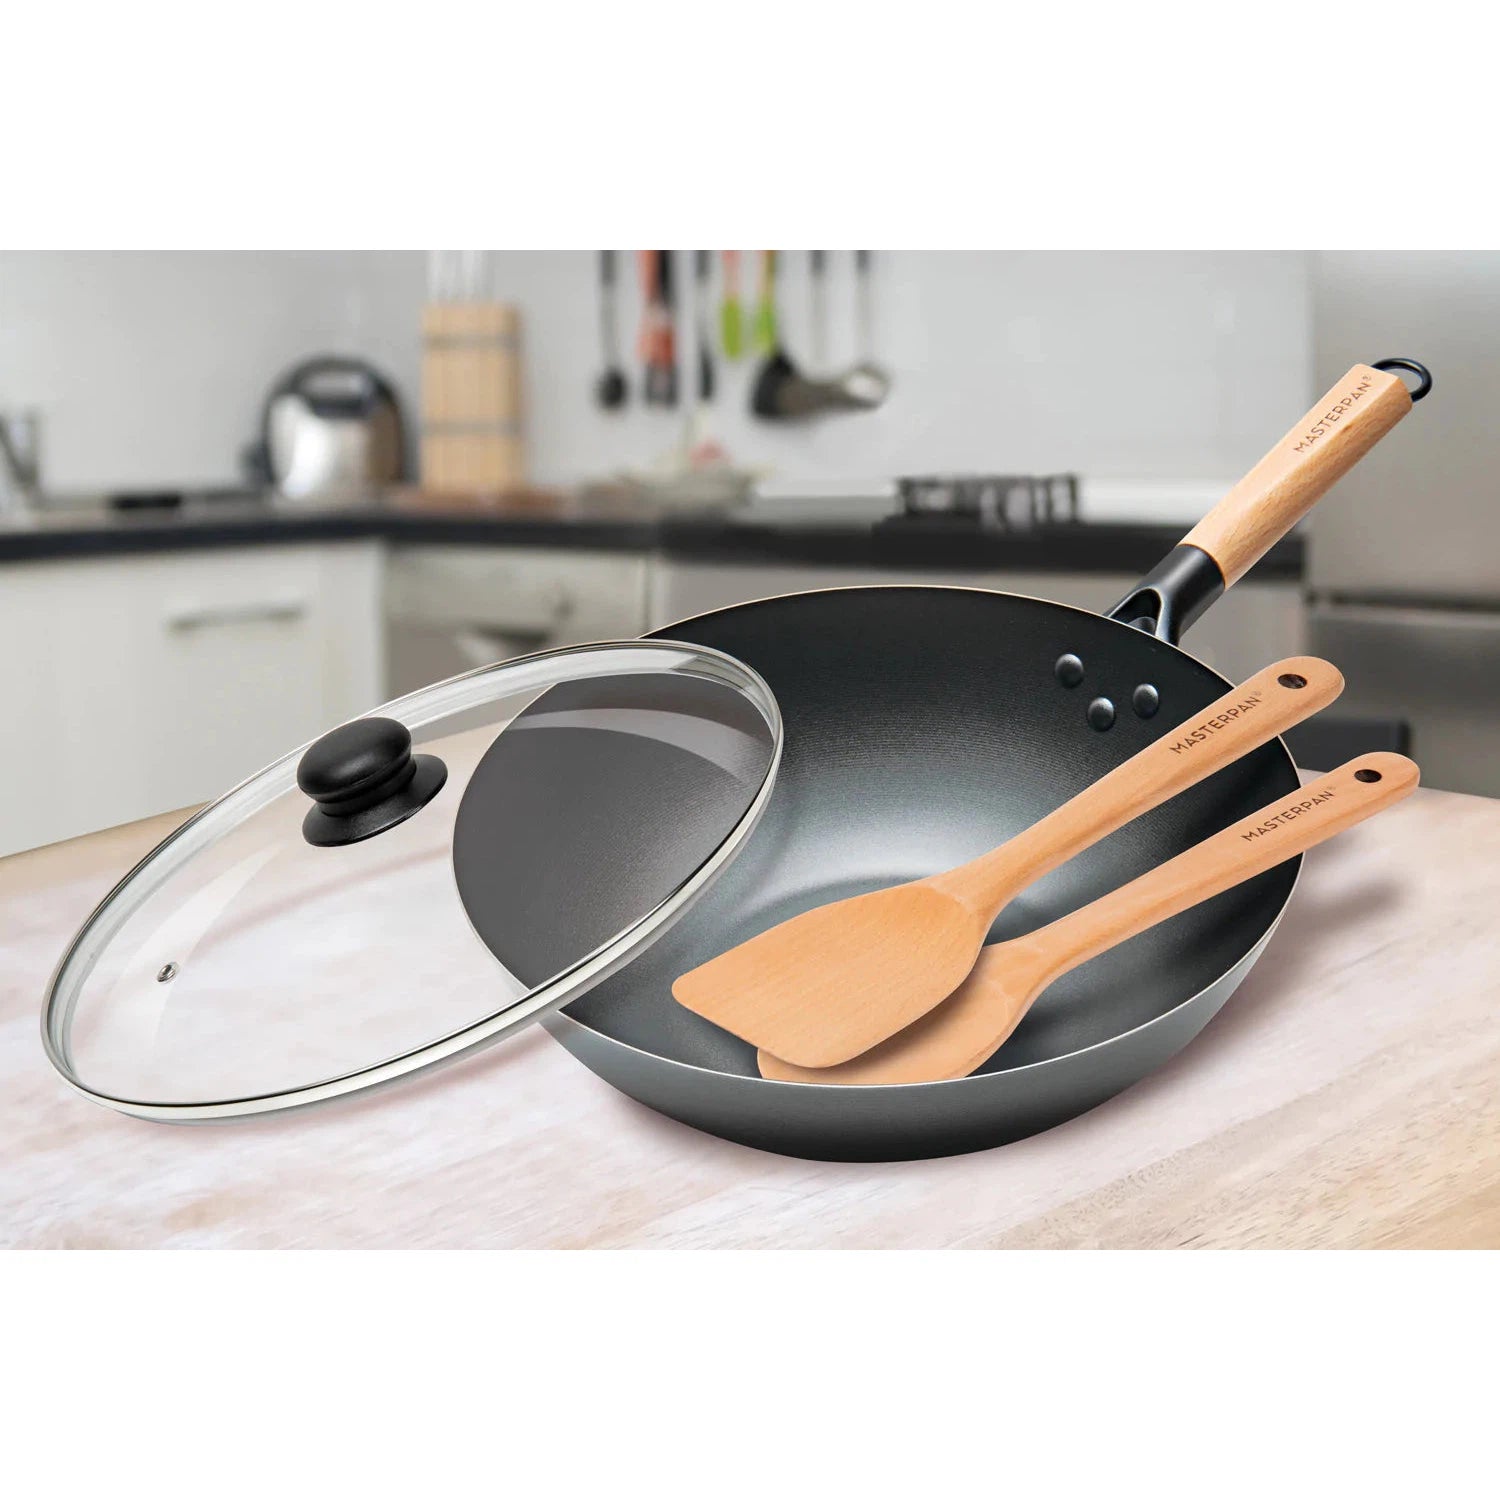 MASTERPAN Classico Series 12” Carbon Steel Wok With Glass Lid and Wooden Utensils, Non-stick Flat Bottom Asian Stir-Fry Cookware With Wooden Handle